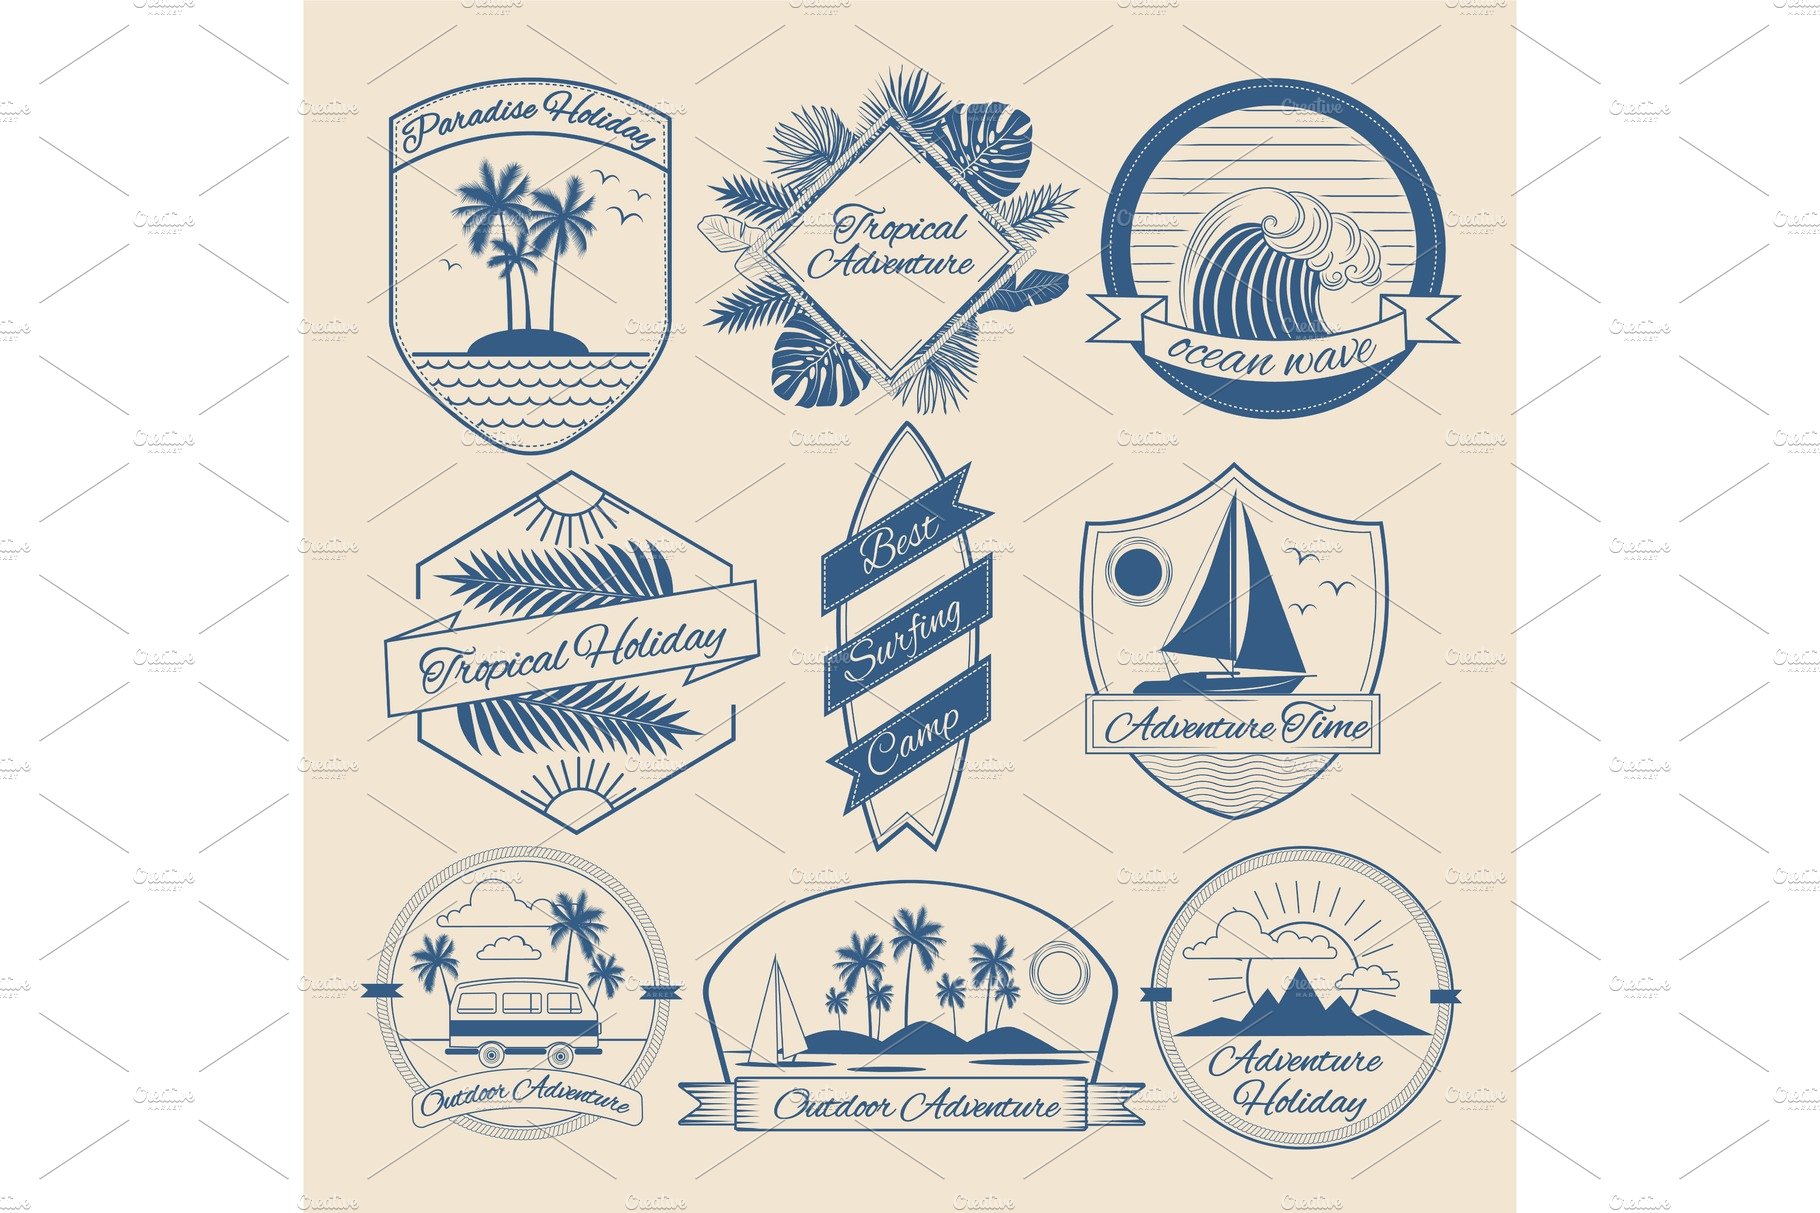 Vintage Outdoor Adventure Badges cover image.